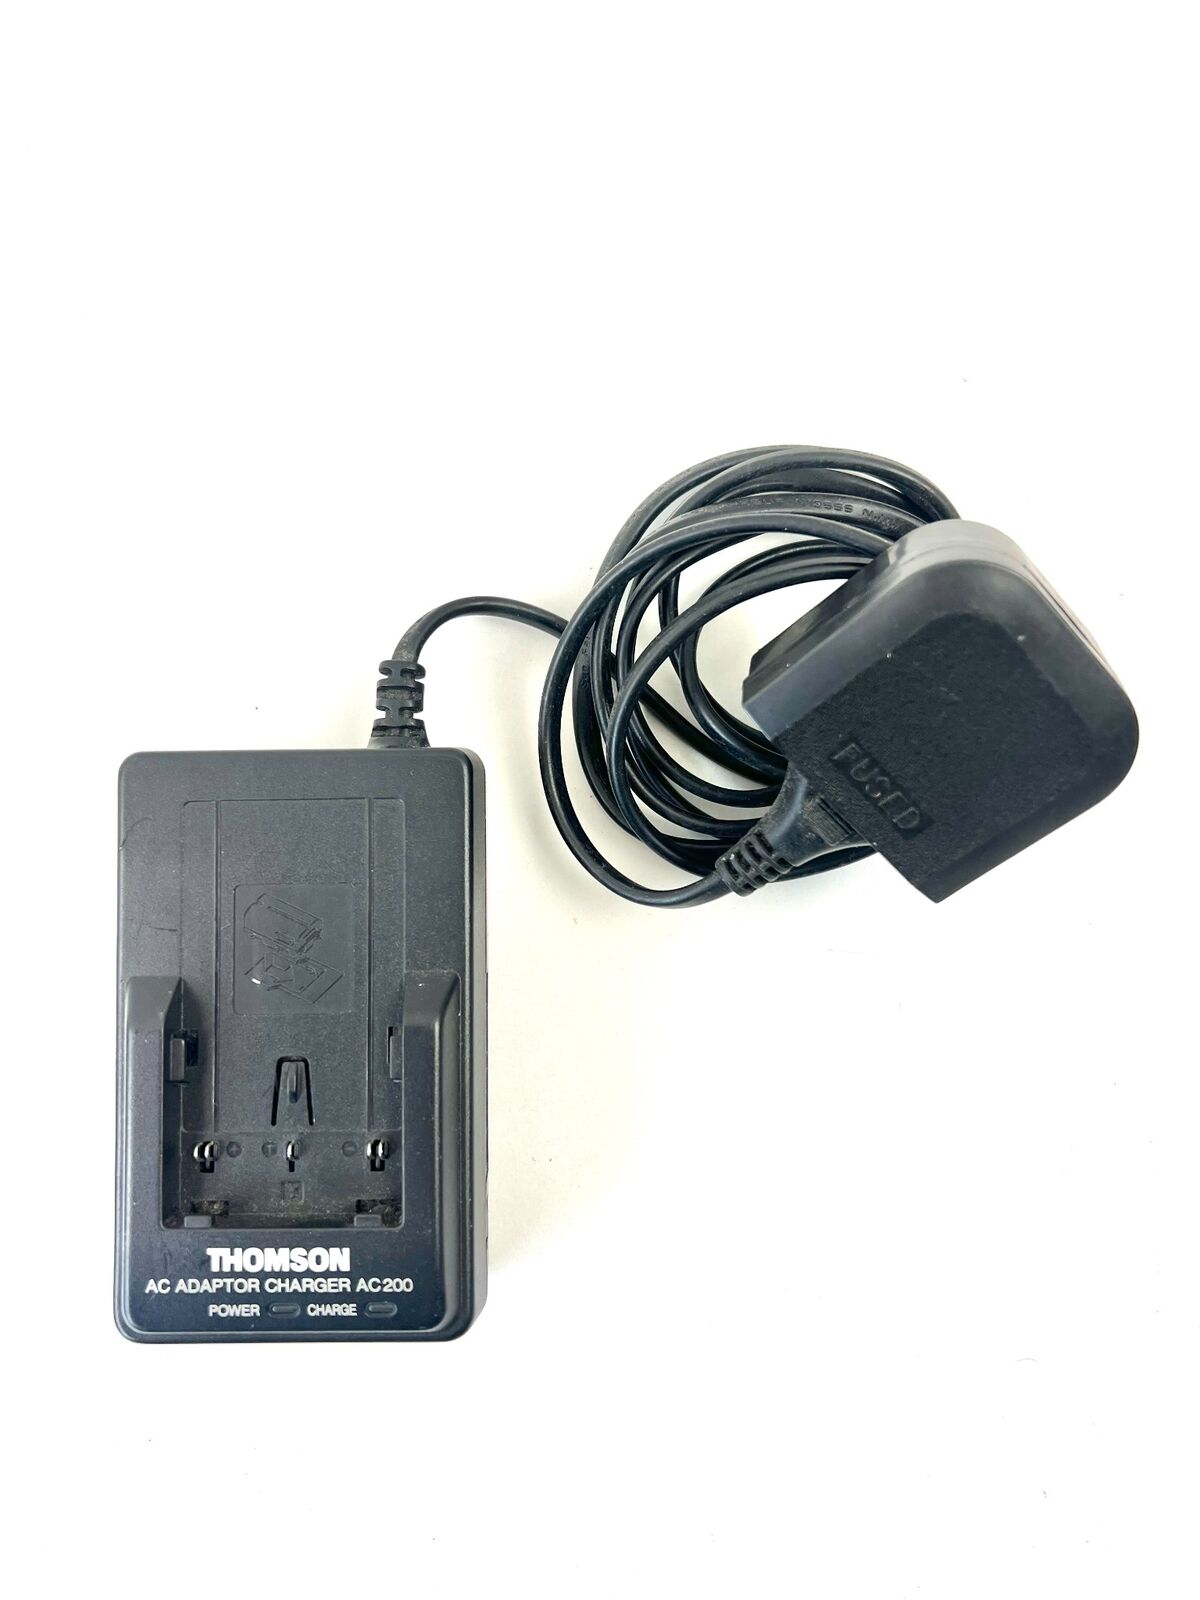 Thomson AC Adaptor Charger AC200 Charging Battery Cradle Camcorder Mains Supply Brand Thomson Type Cradles/Docks Batter